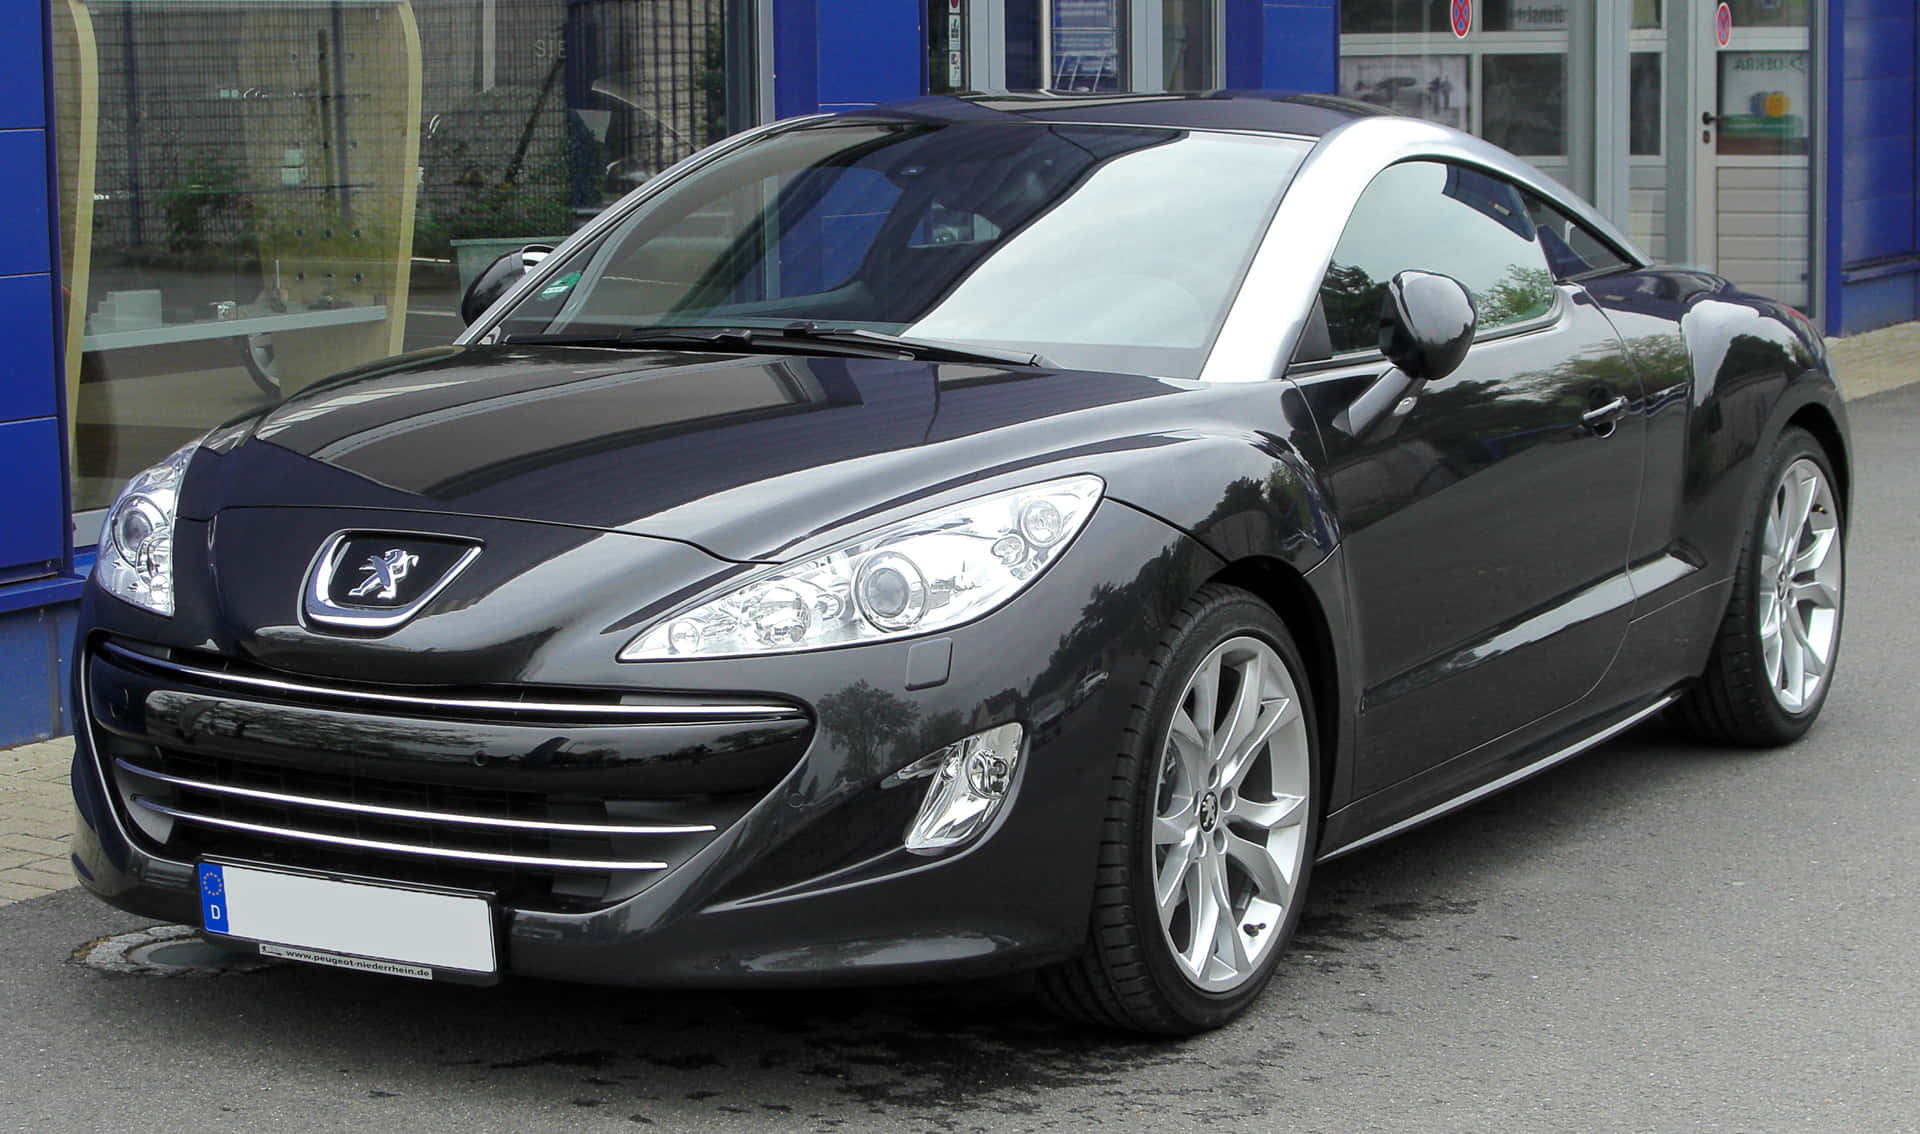 Caption: The Stylish Peugeot Rcz Luxurious Sports Coupe In Action Wallpaper